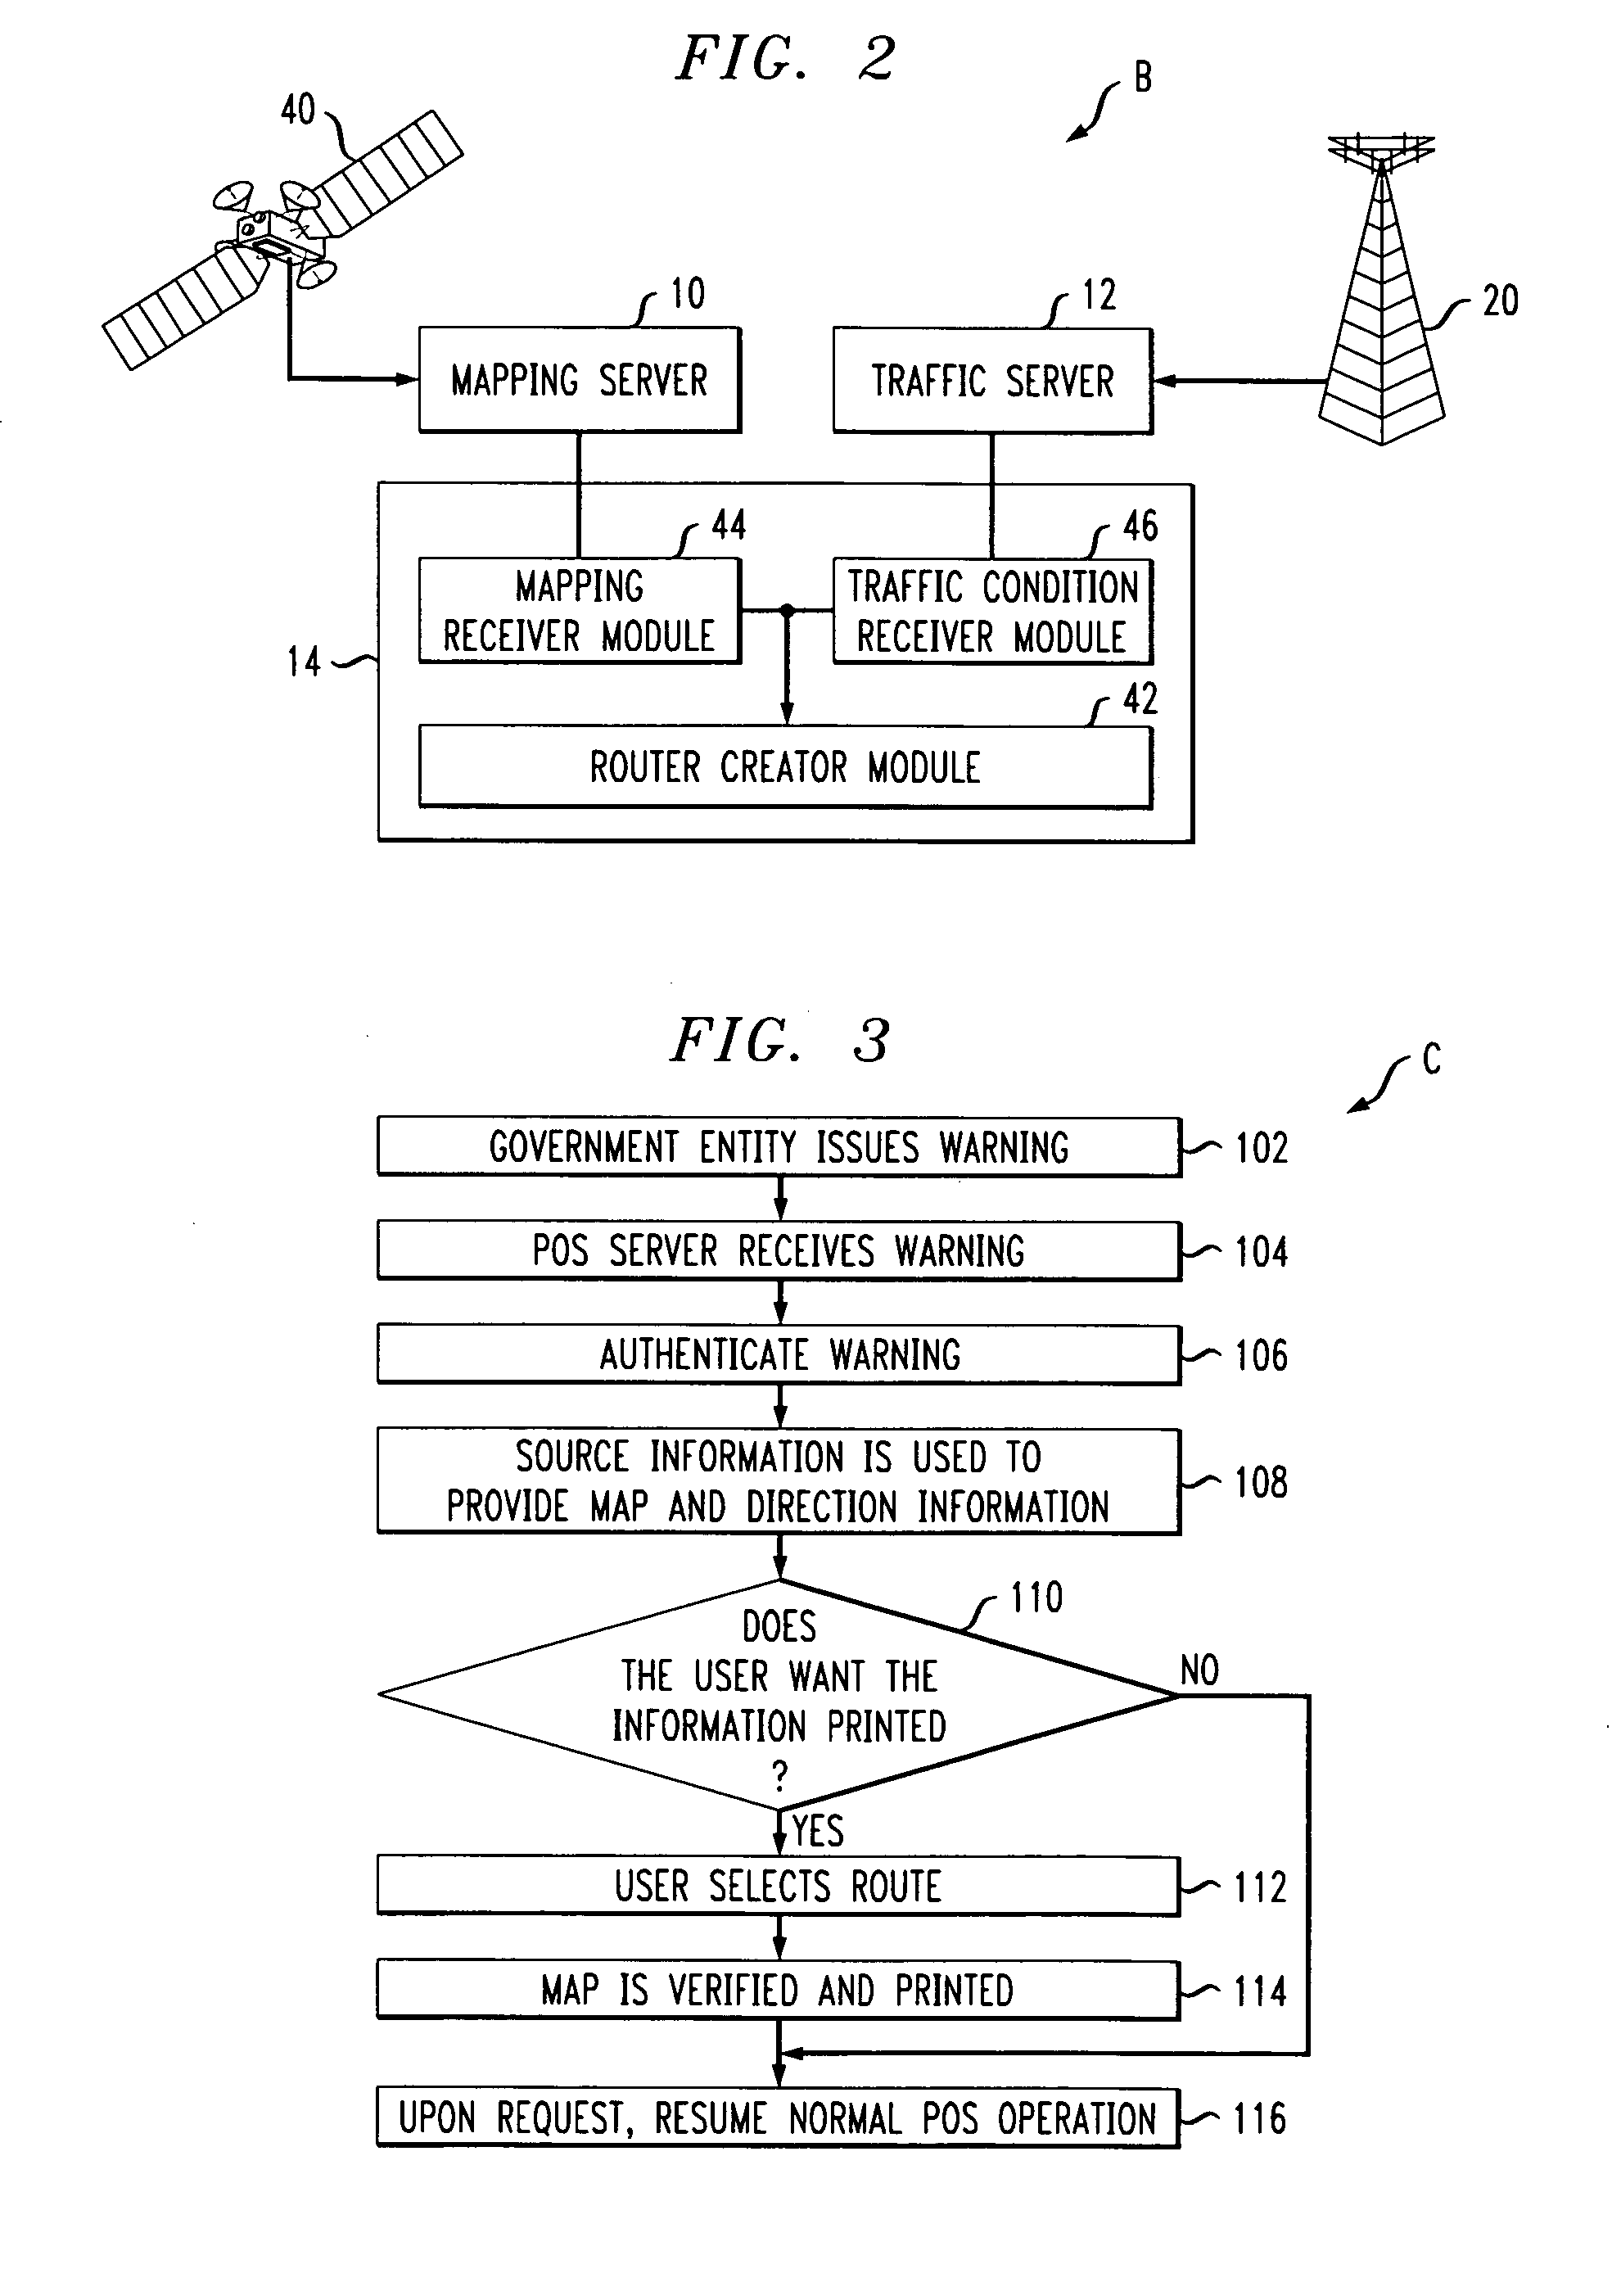 Method and apparatus for emergency map display system